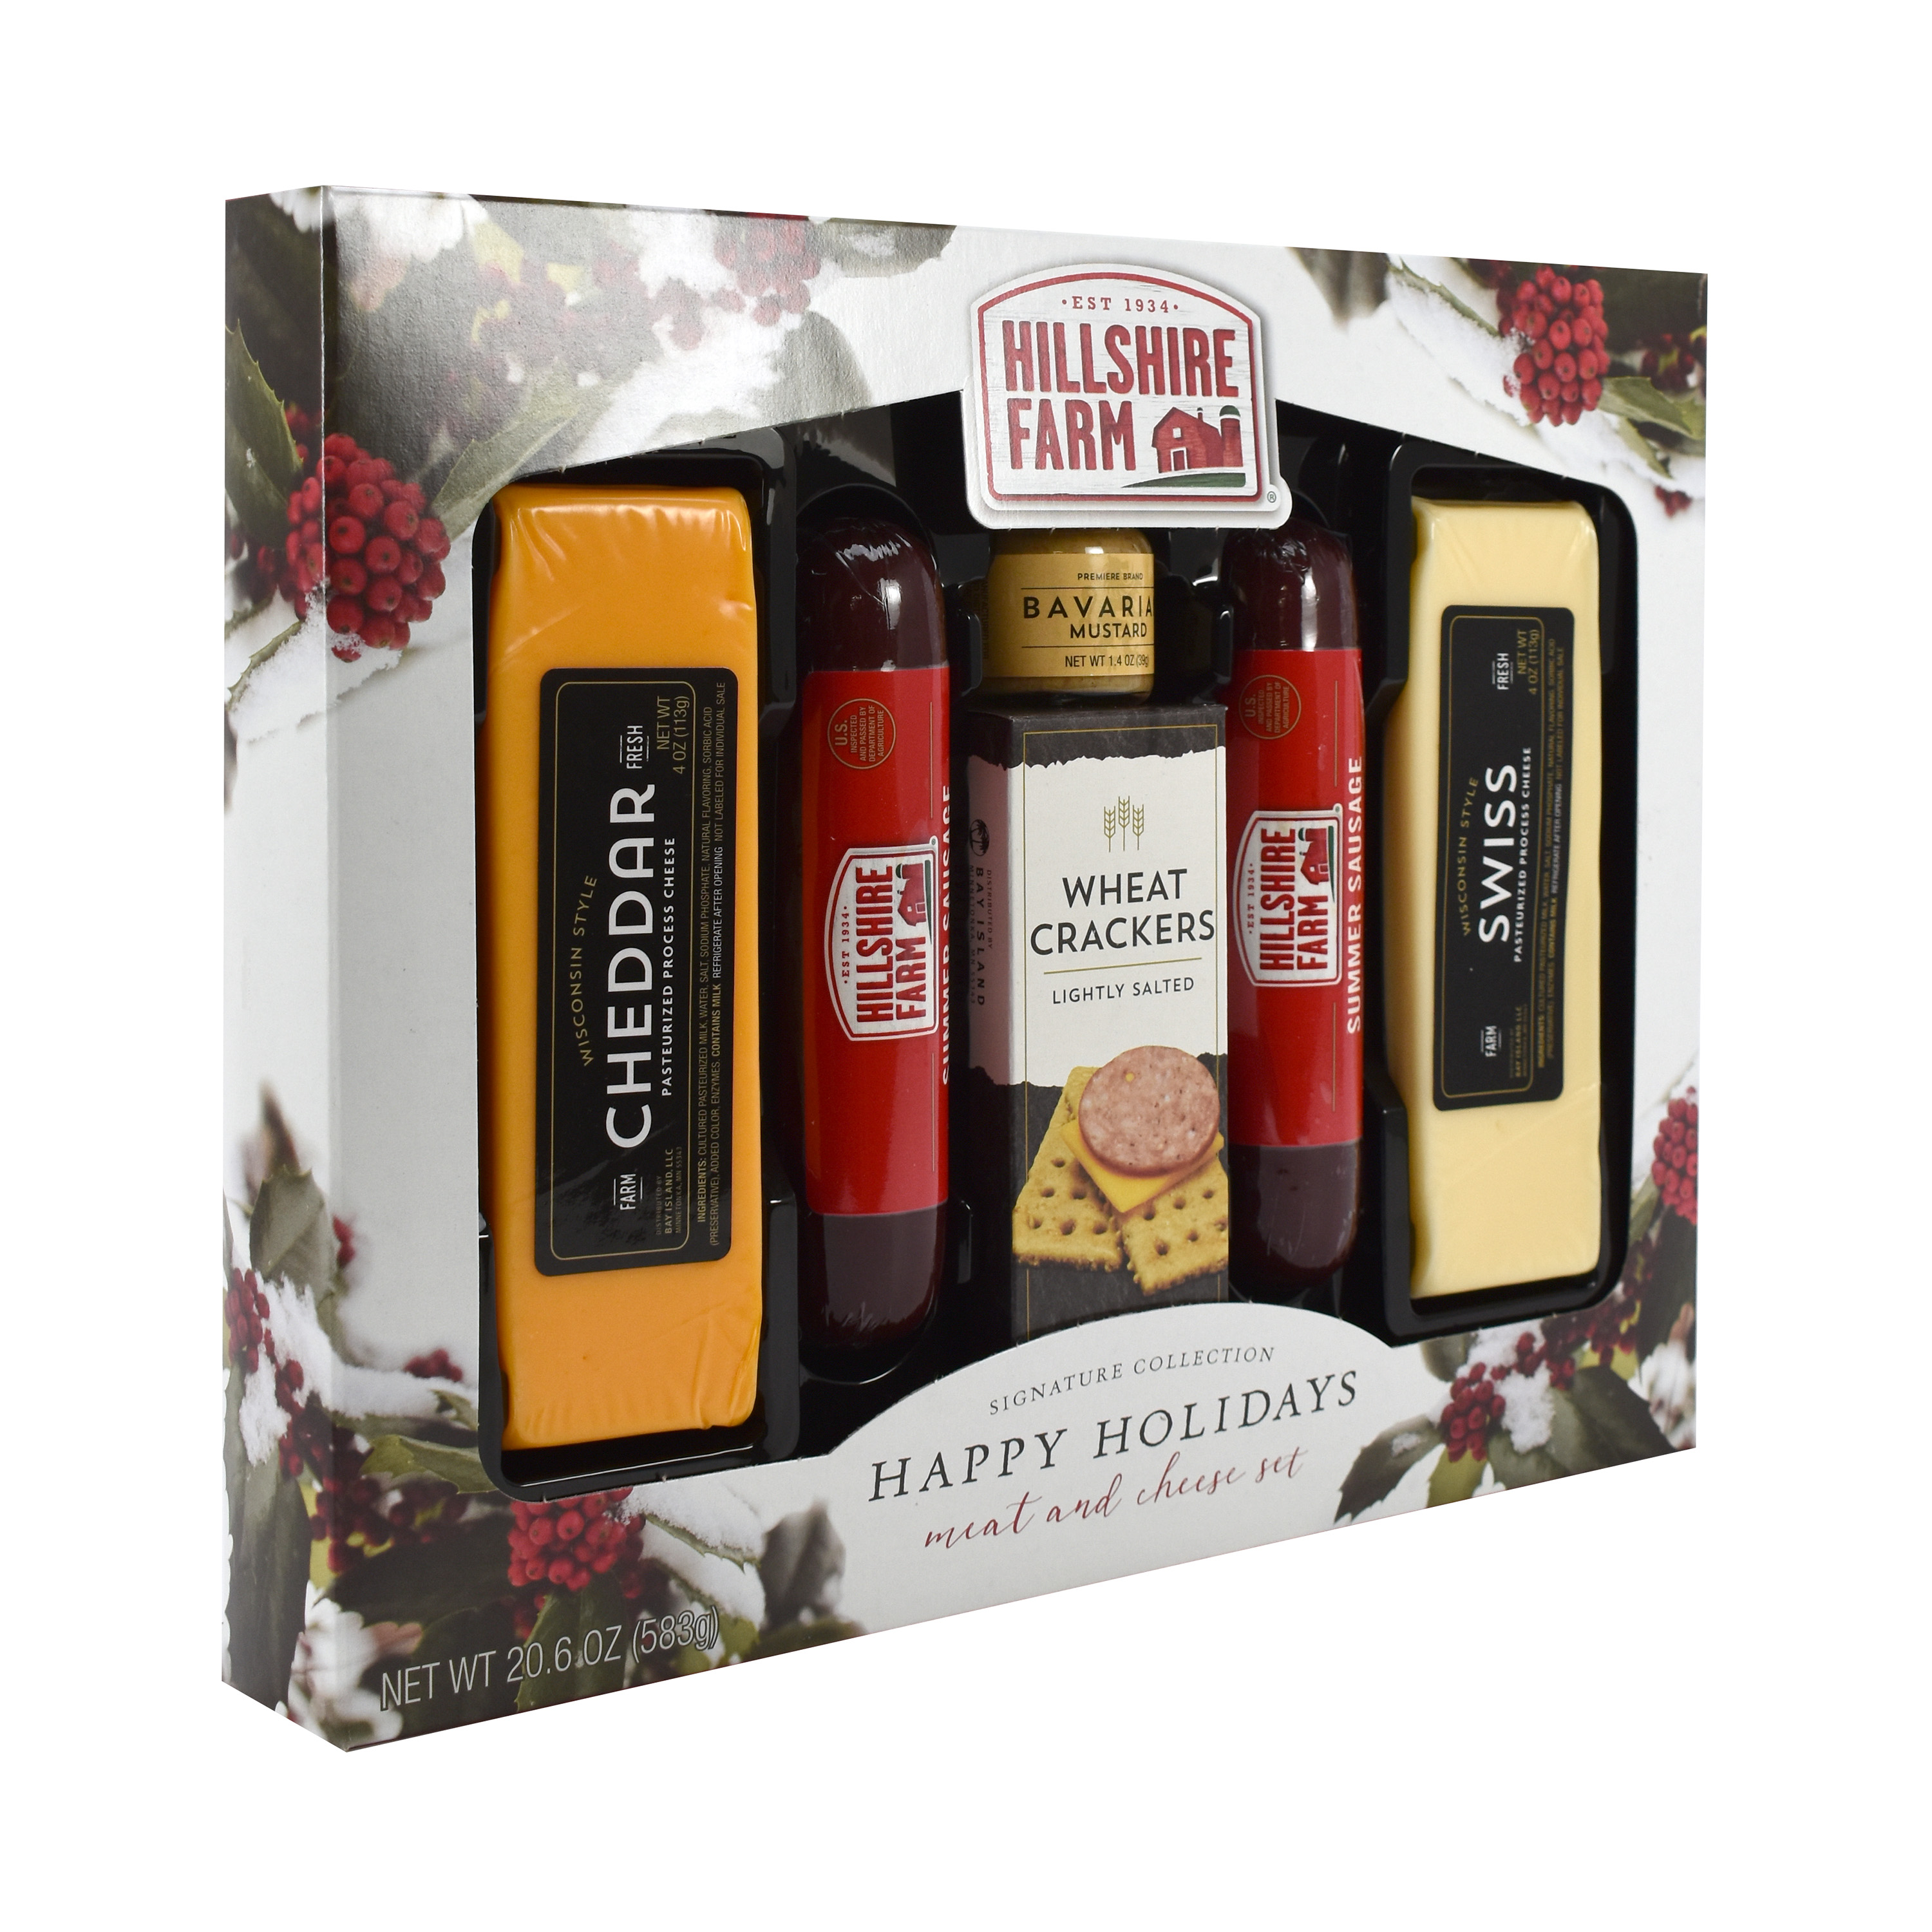 Hillshire Farm Meat and Cheese Holiday Gift Box, Assorted Meat & Cheese, 20.6oz - image 3 of 5